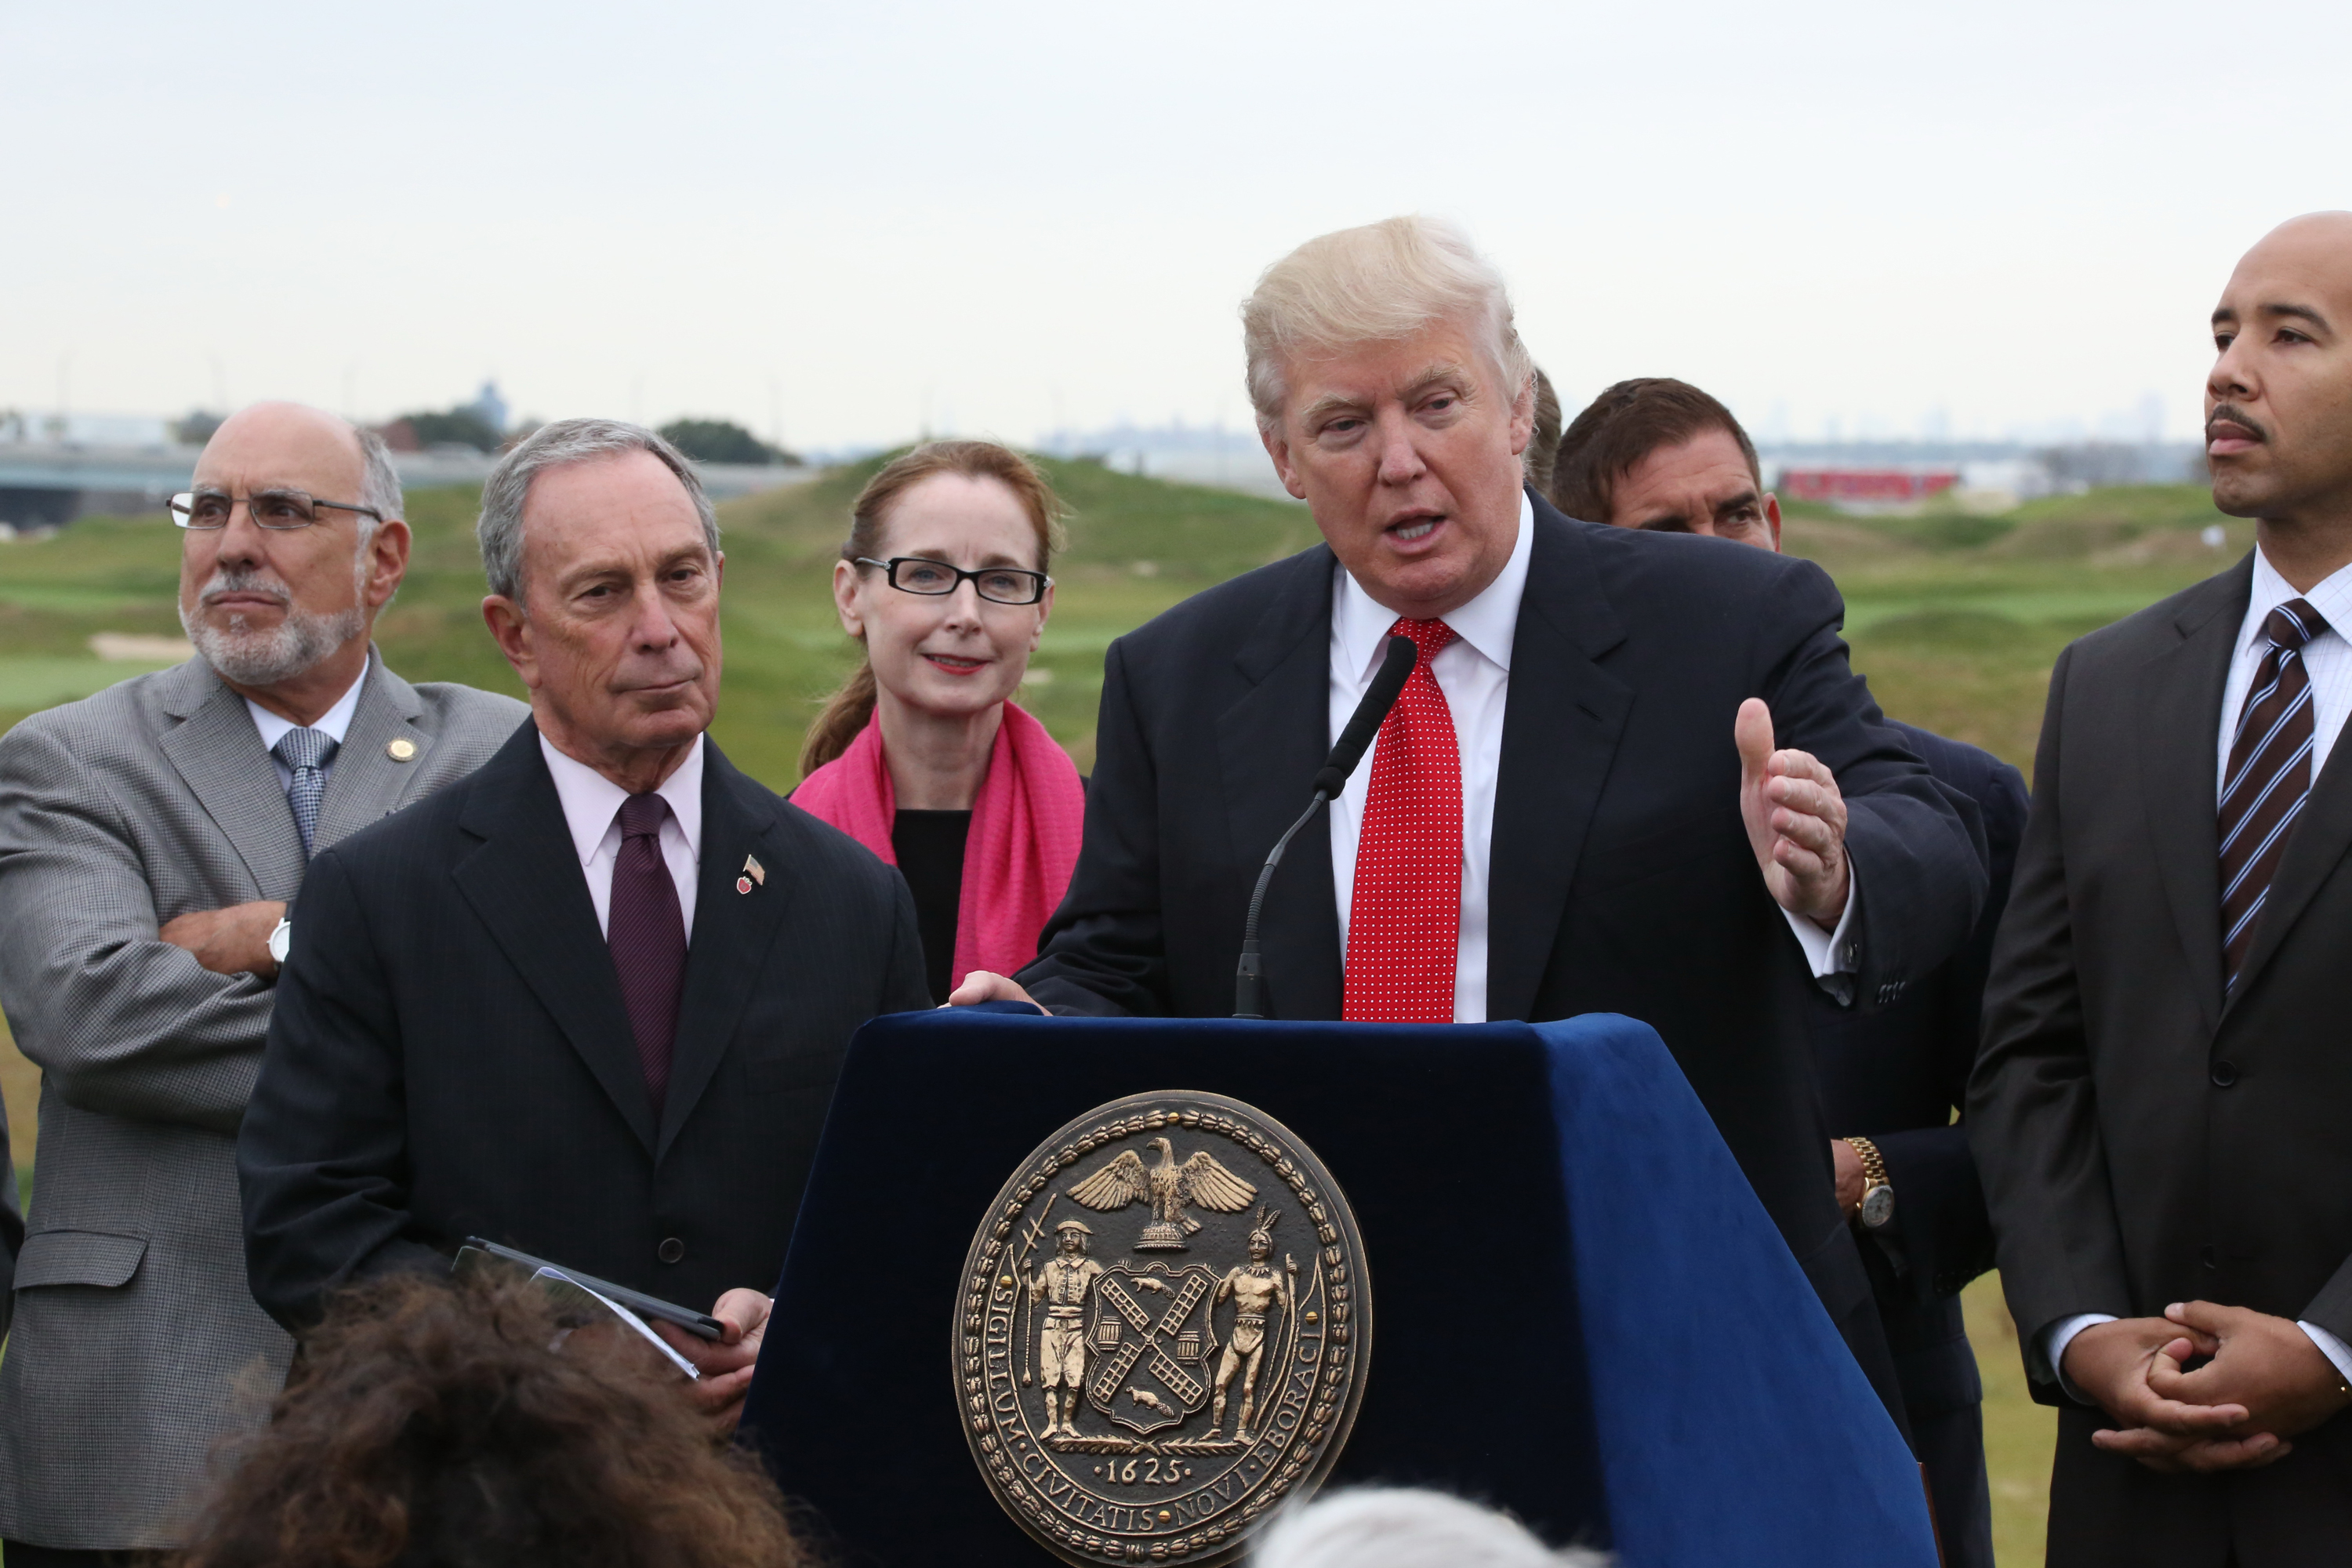 Donald Trump speaks alongside former Mayor Michael Bloomberg at the opening of the Trump Golf Links in The Bronx, Oct. 16, 2013.